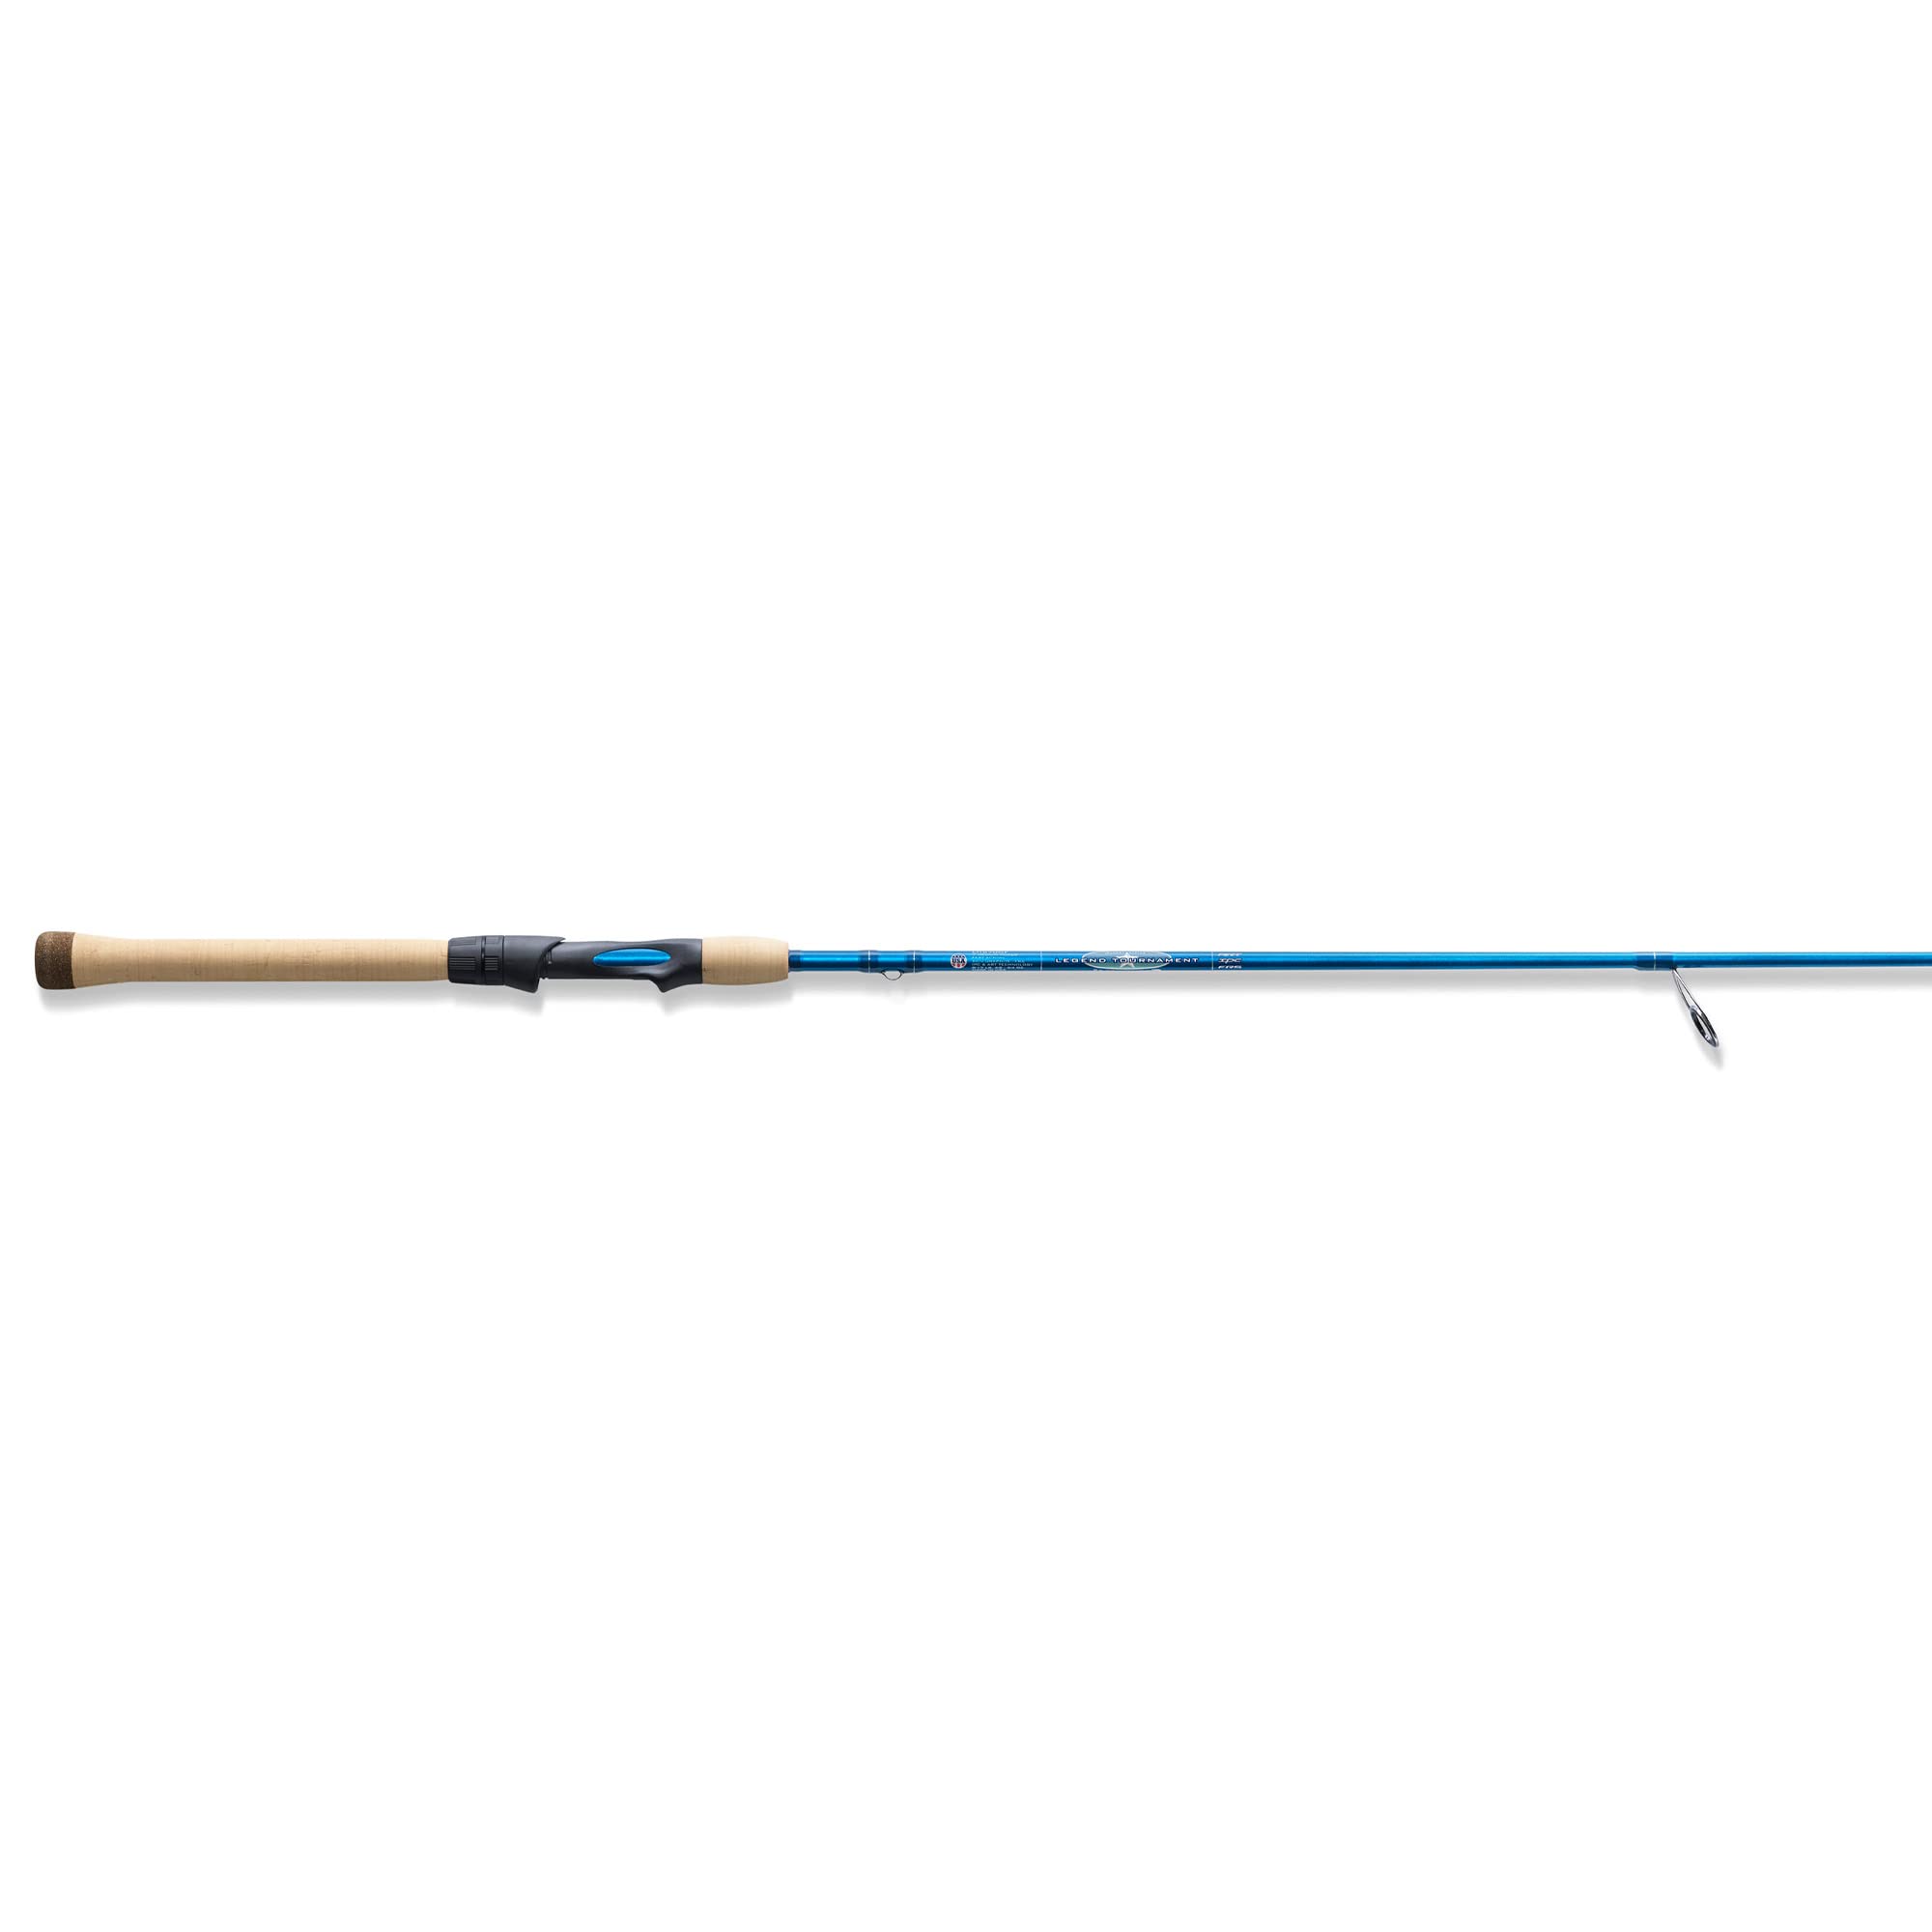 Limited-time deal: St. Croix Rods Legend Tournament Inshore Spinning Fishing Rod - $262.50